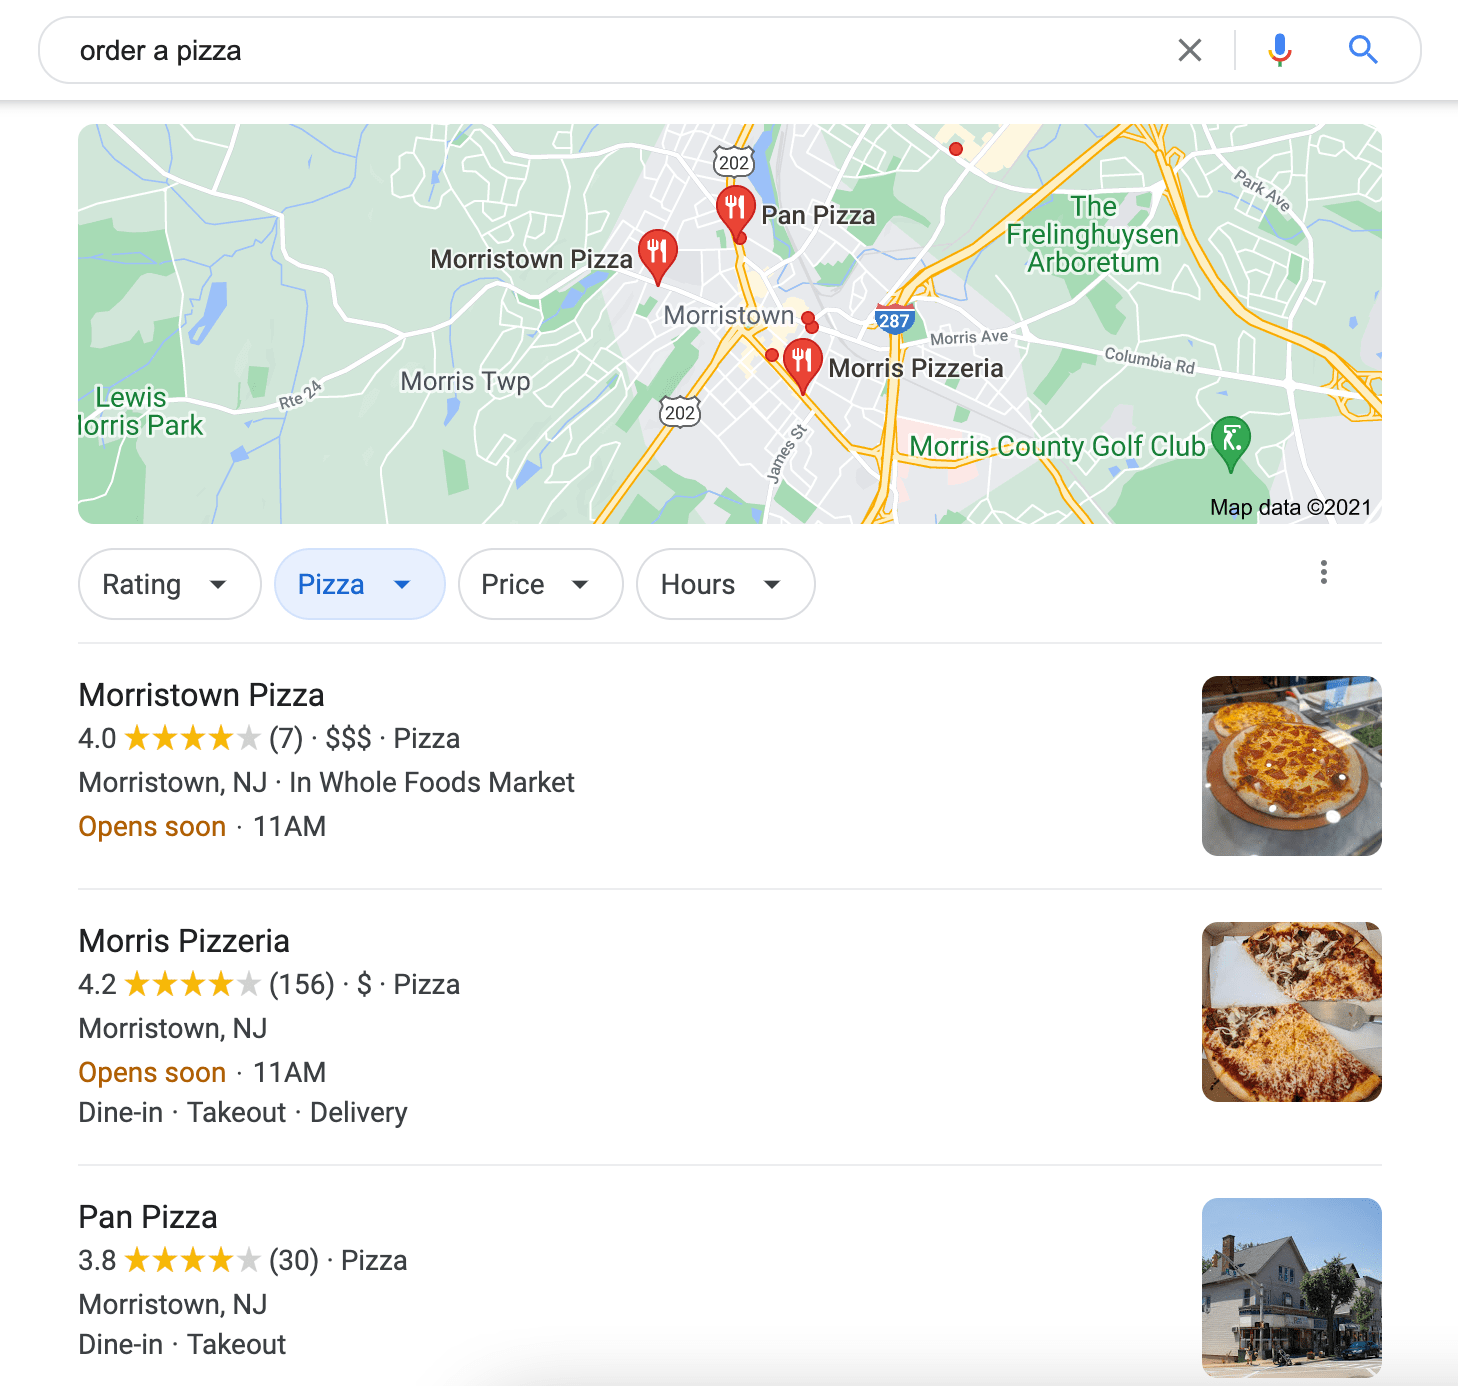 showing local pizza places in search queries for the search term order a pizza